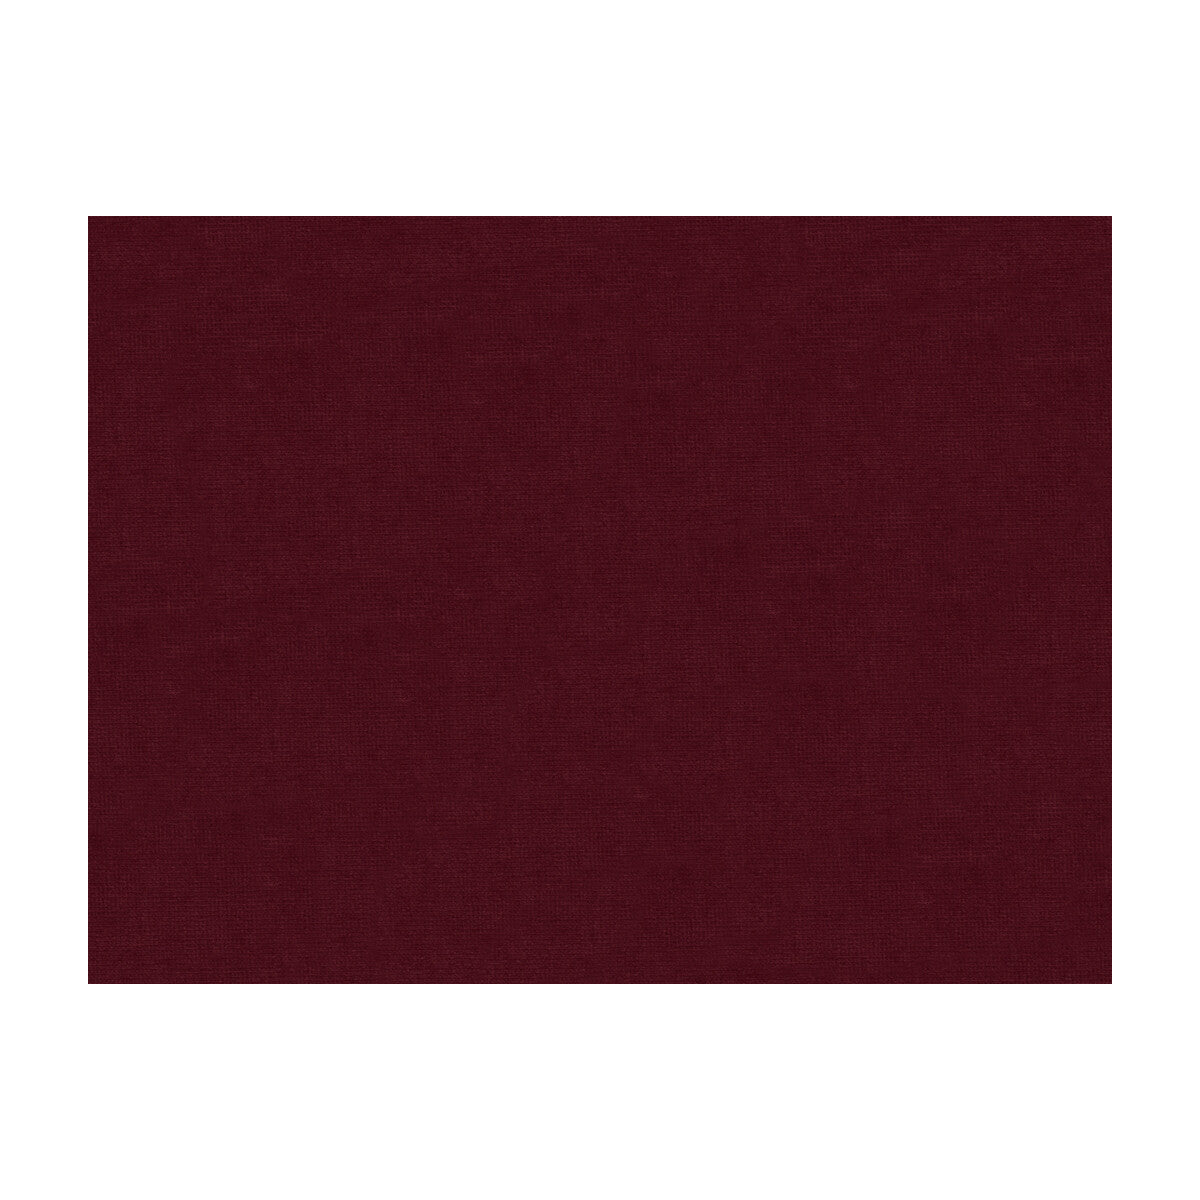 Charmant Velvet fabric in chianti color - pattern 8013150.909.0 - by Brunschwig &amp; Fils